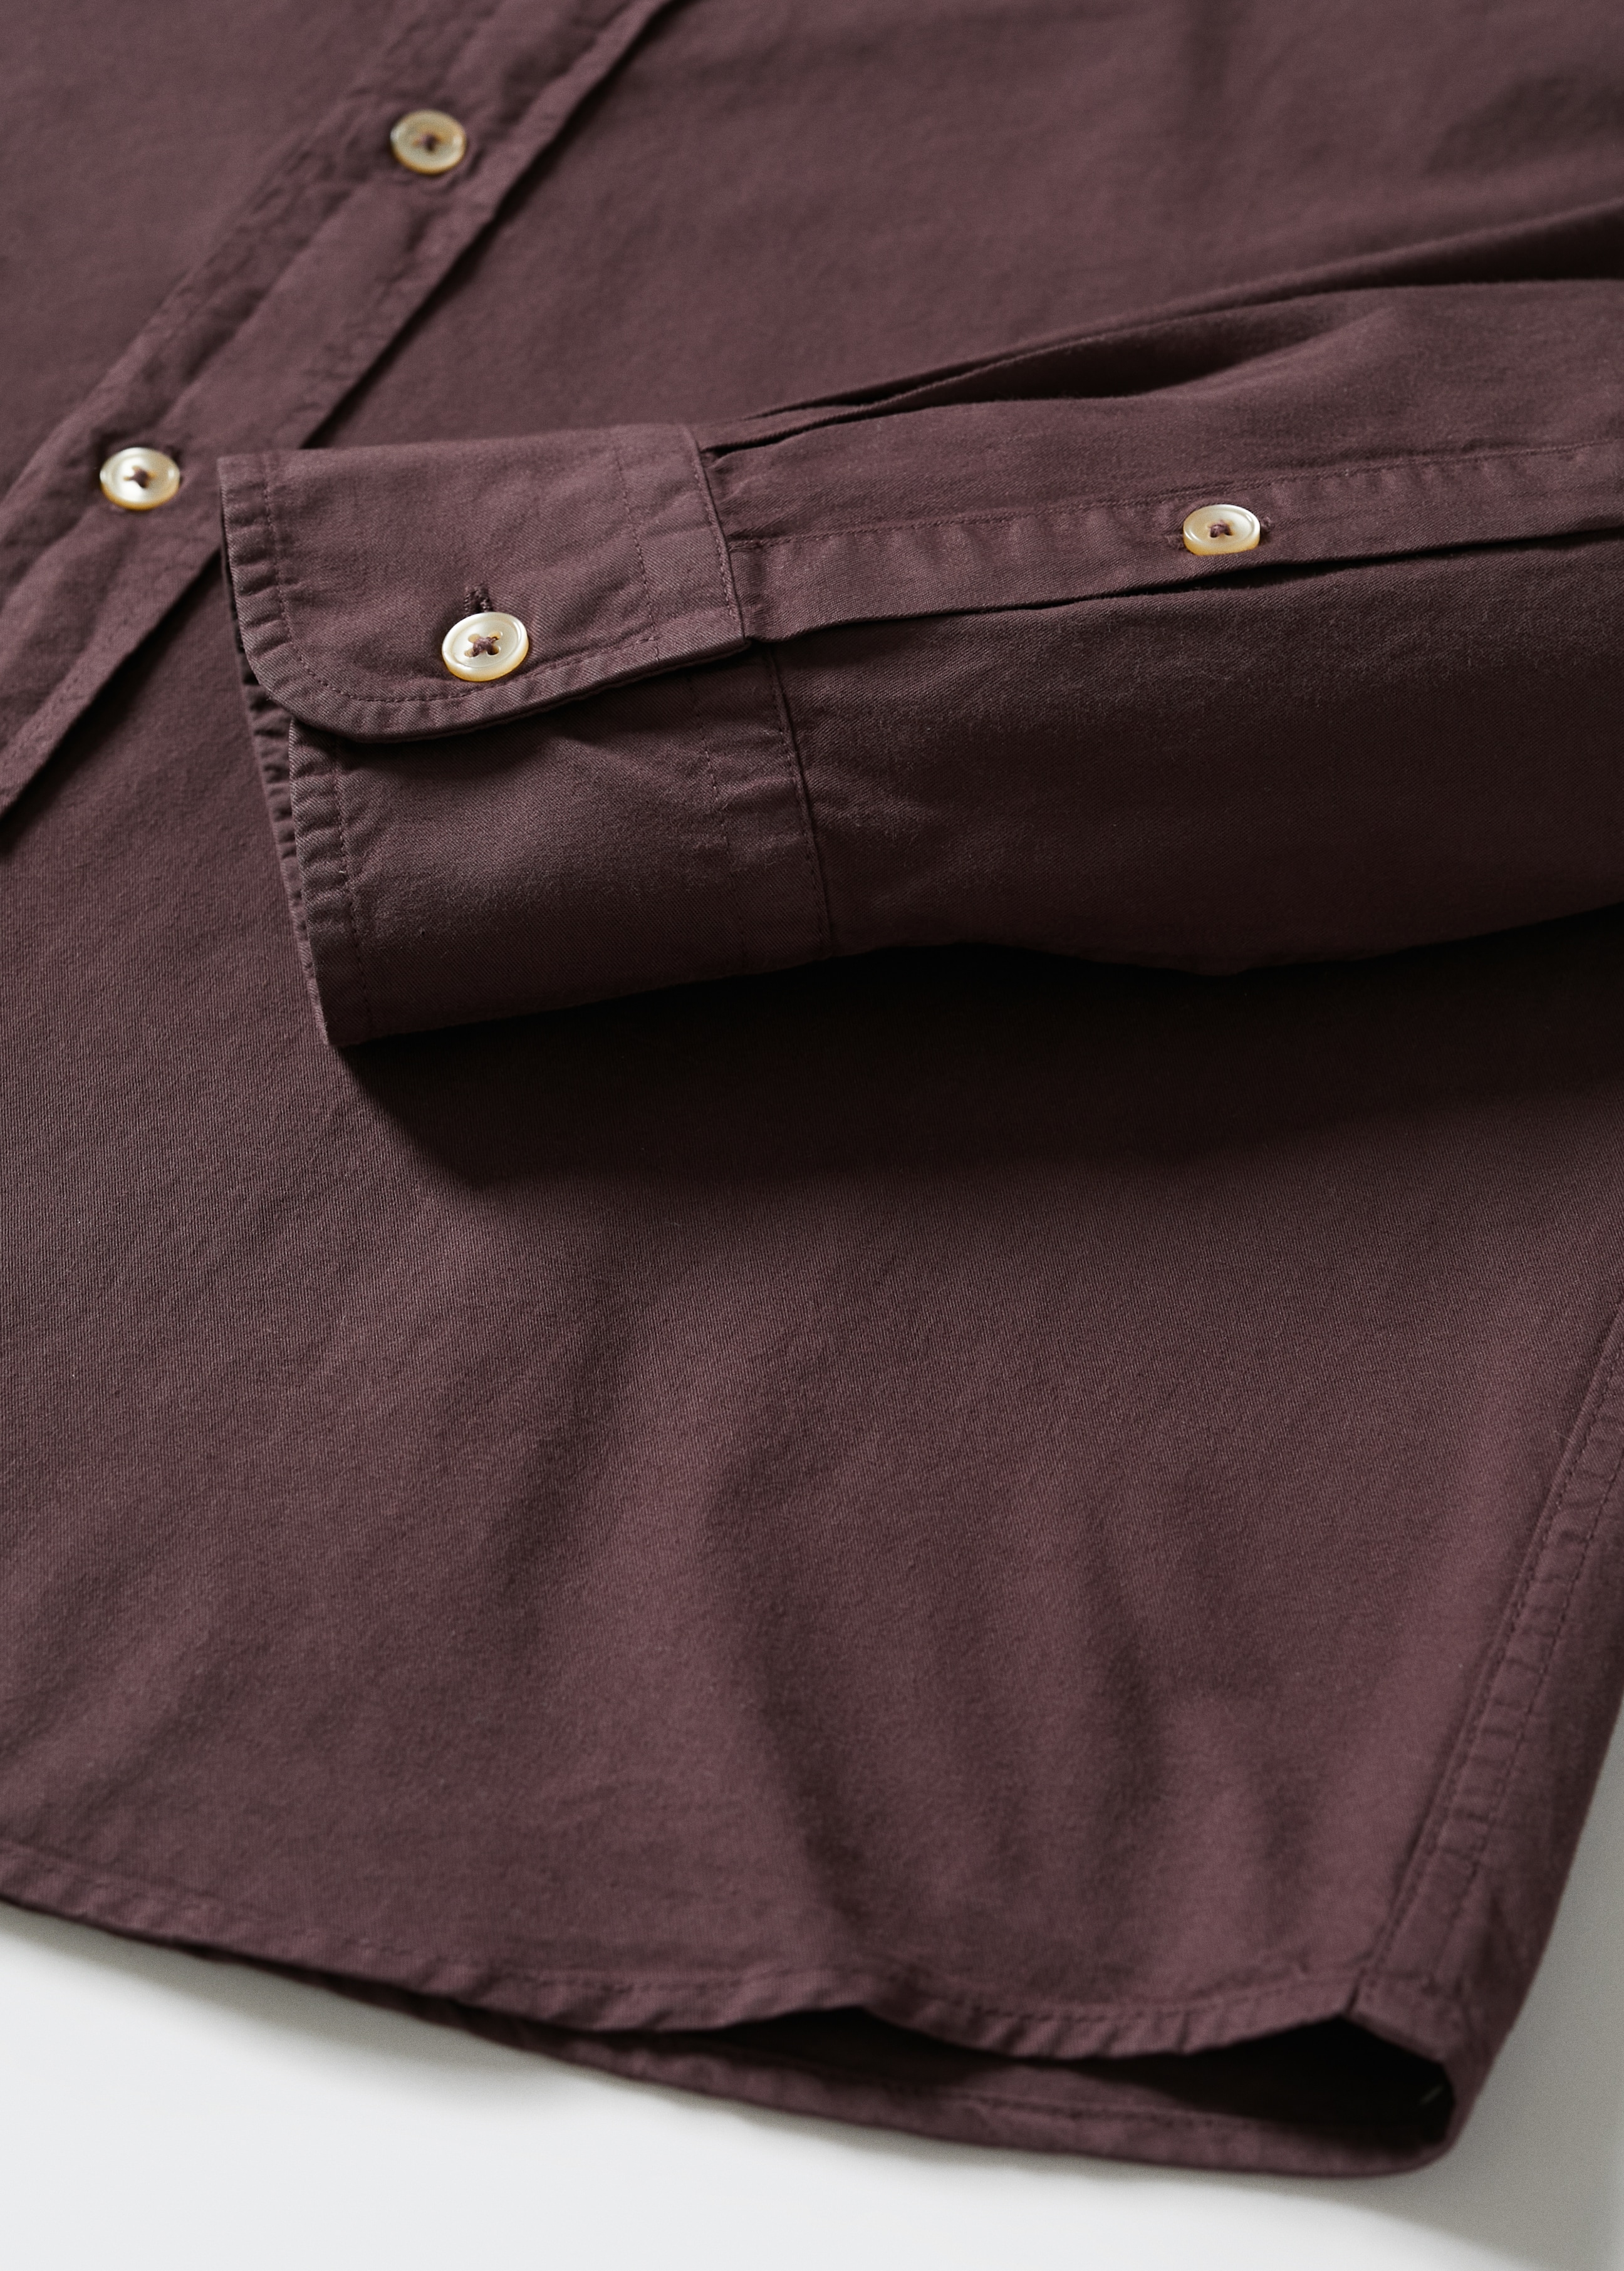 Slim fit cotton shirt - Details of the article 7